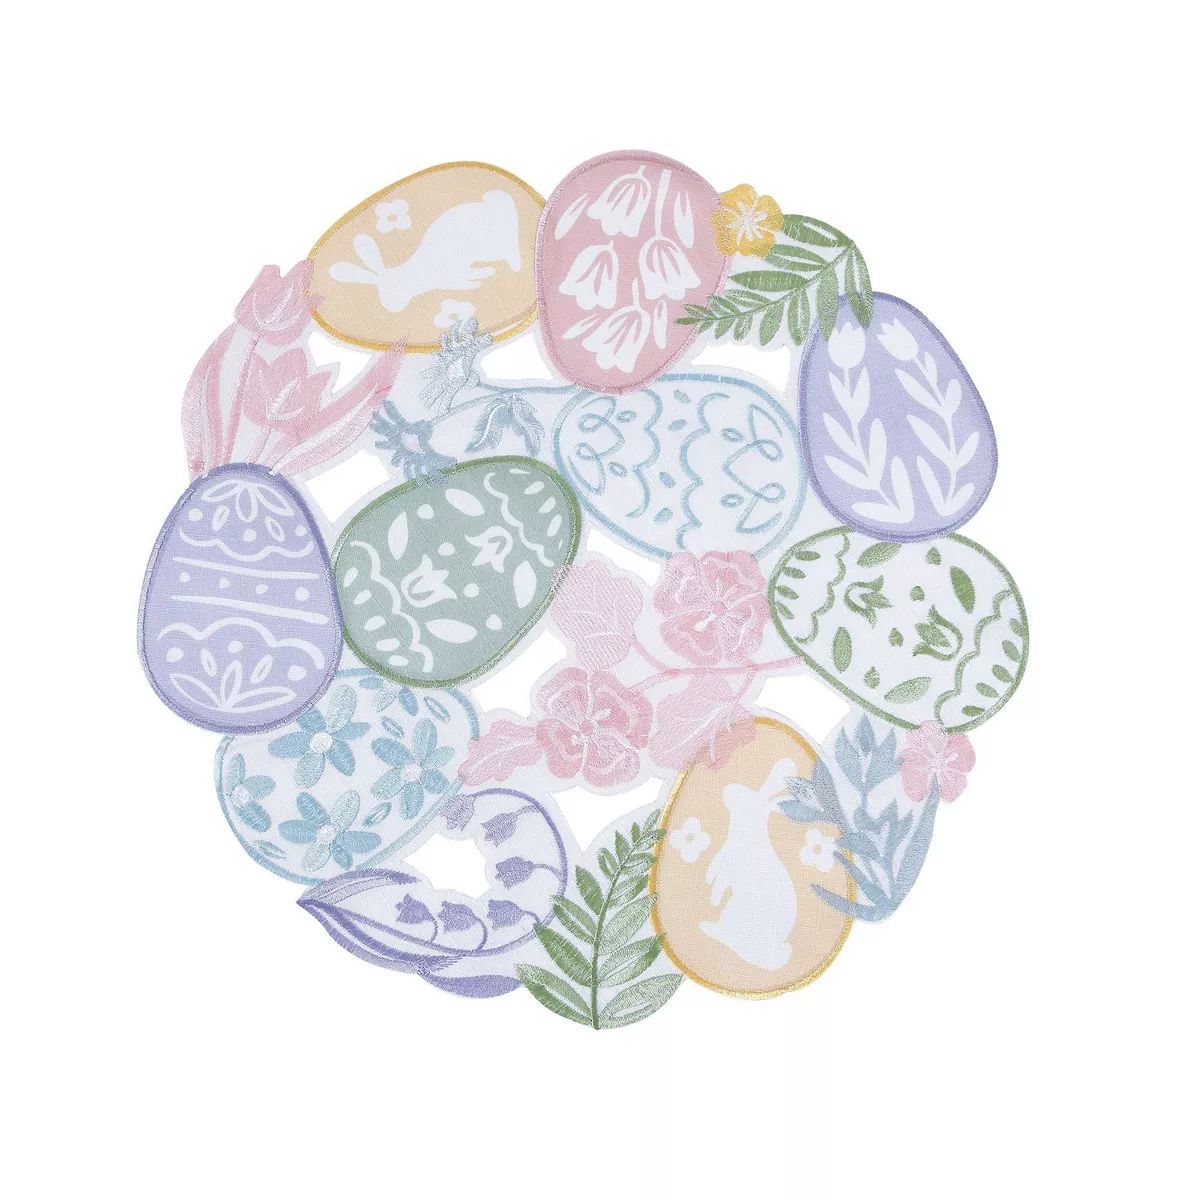 Celebrate Together™ Easter Egg Cutout Placemat | Kohl's